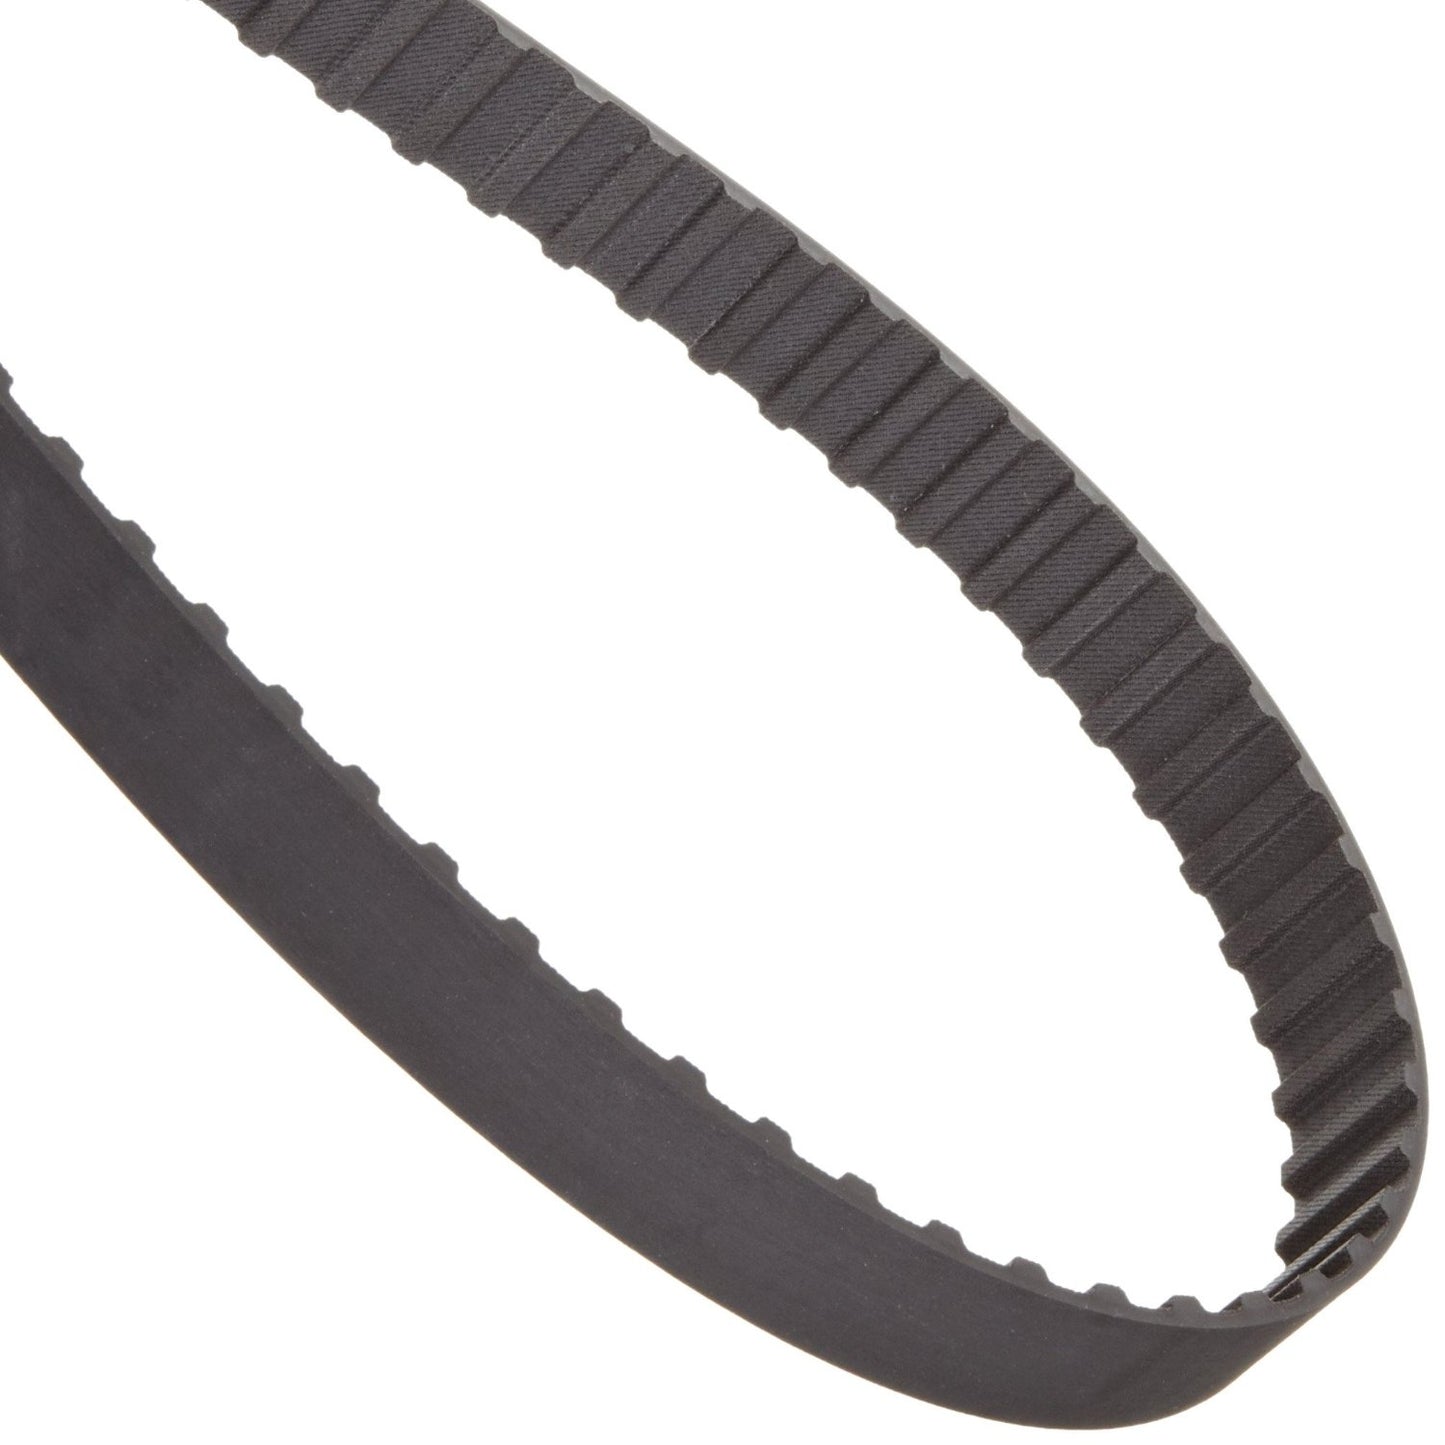 Replacement Toothed Drive Belt for TRADESMAN Band Saw Model 8166